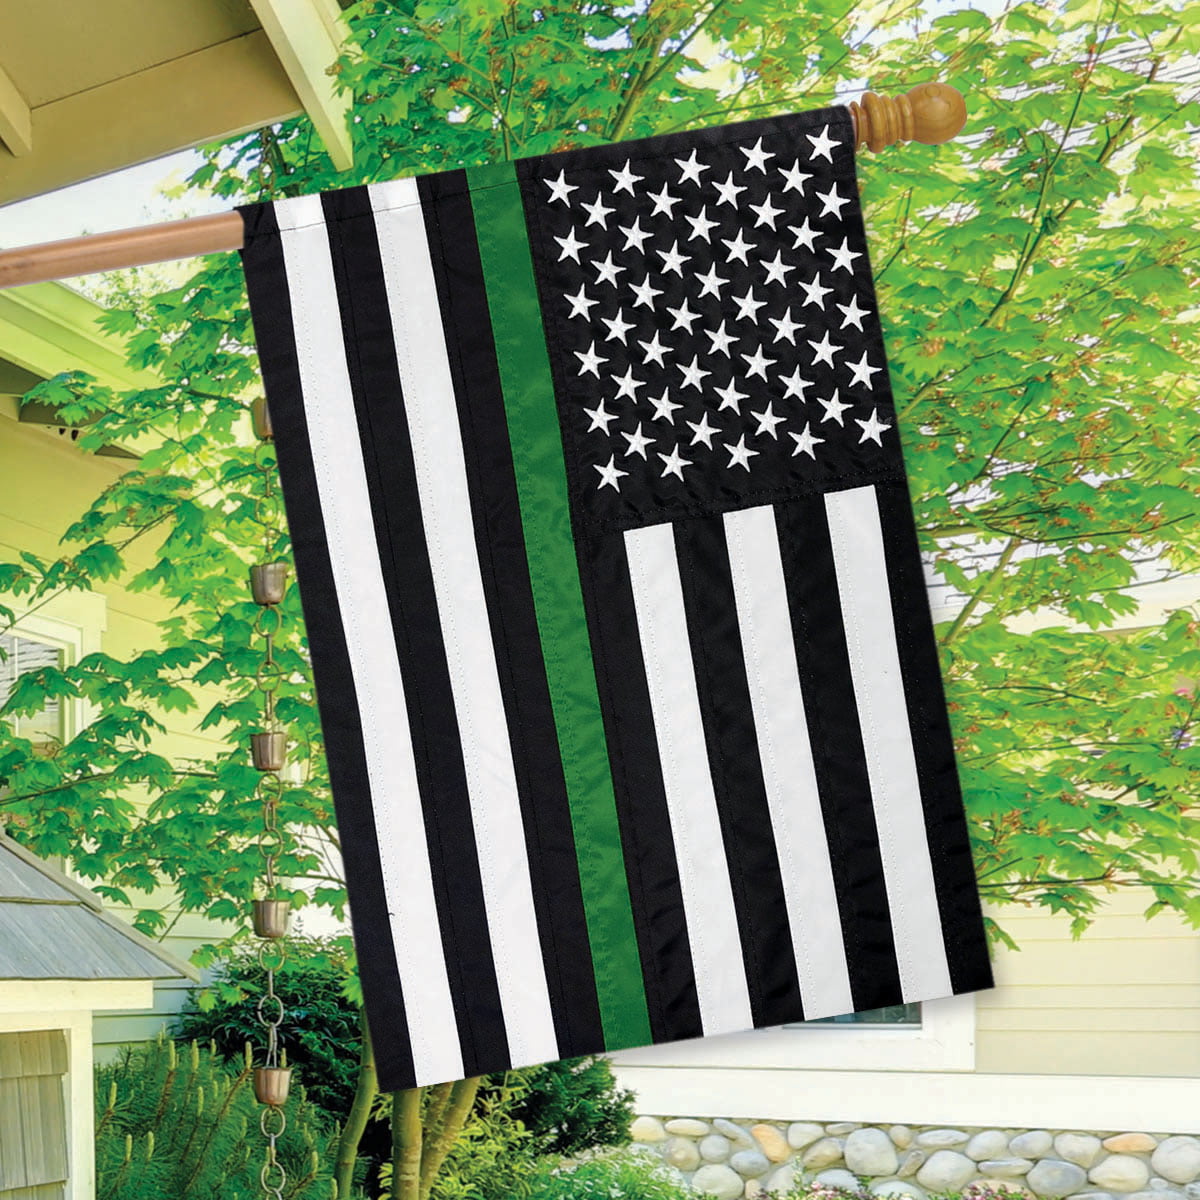 US Thin Green Line Garden Flag Military American Army Federal Support House Yard 